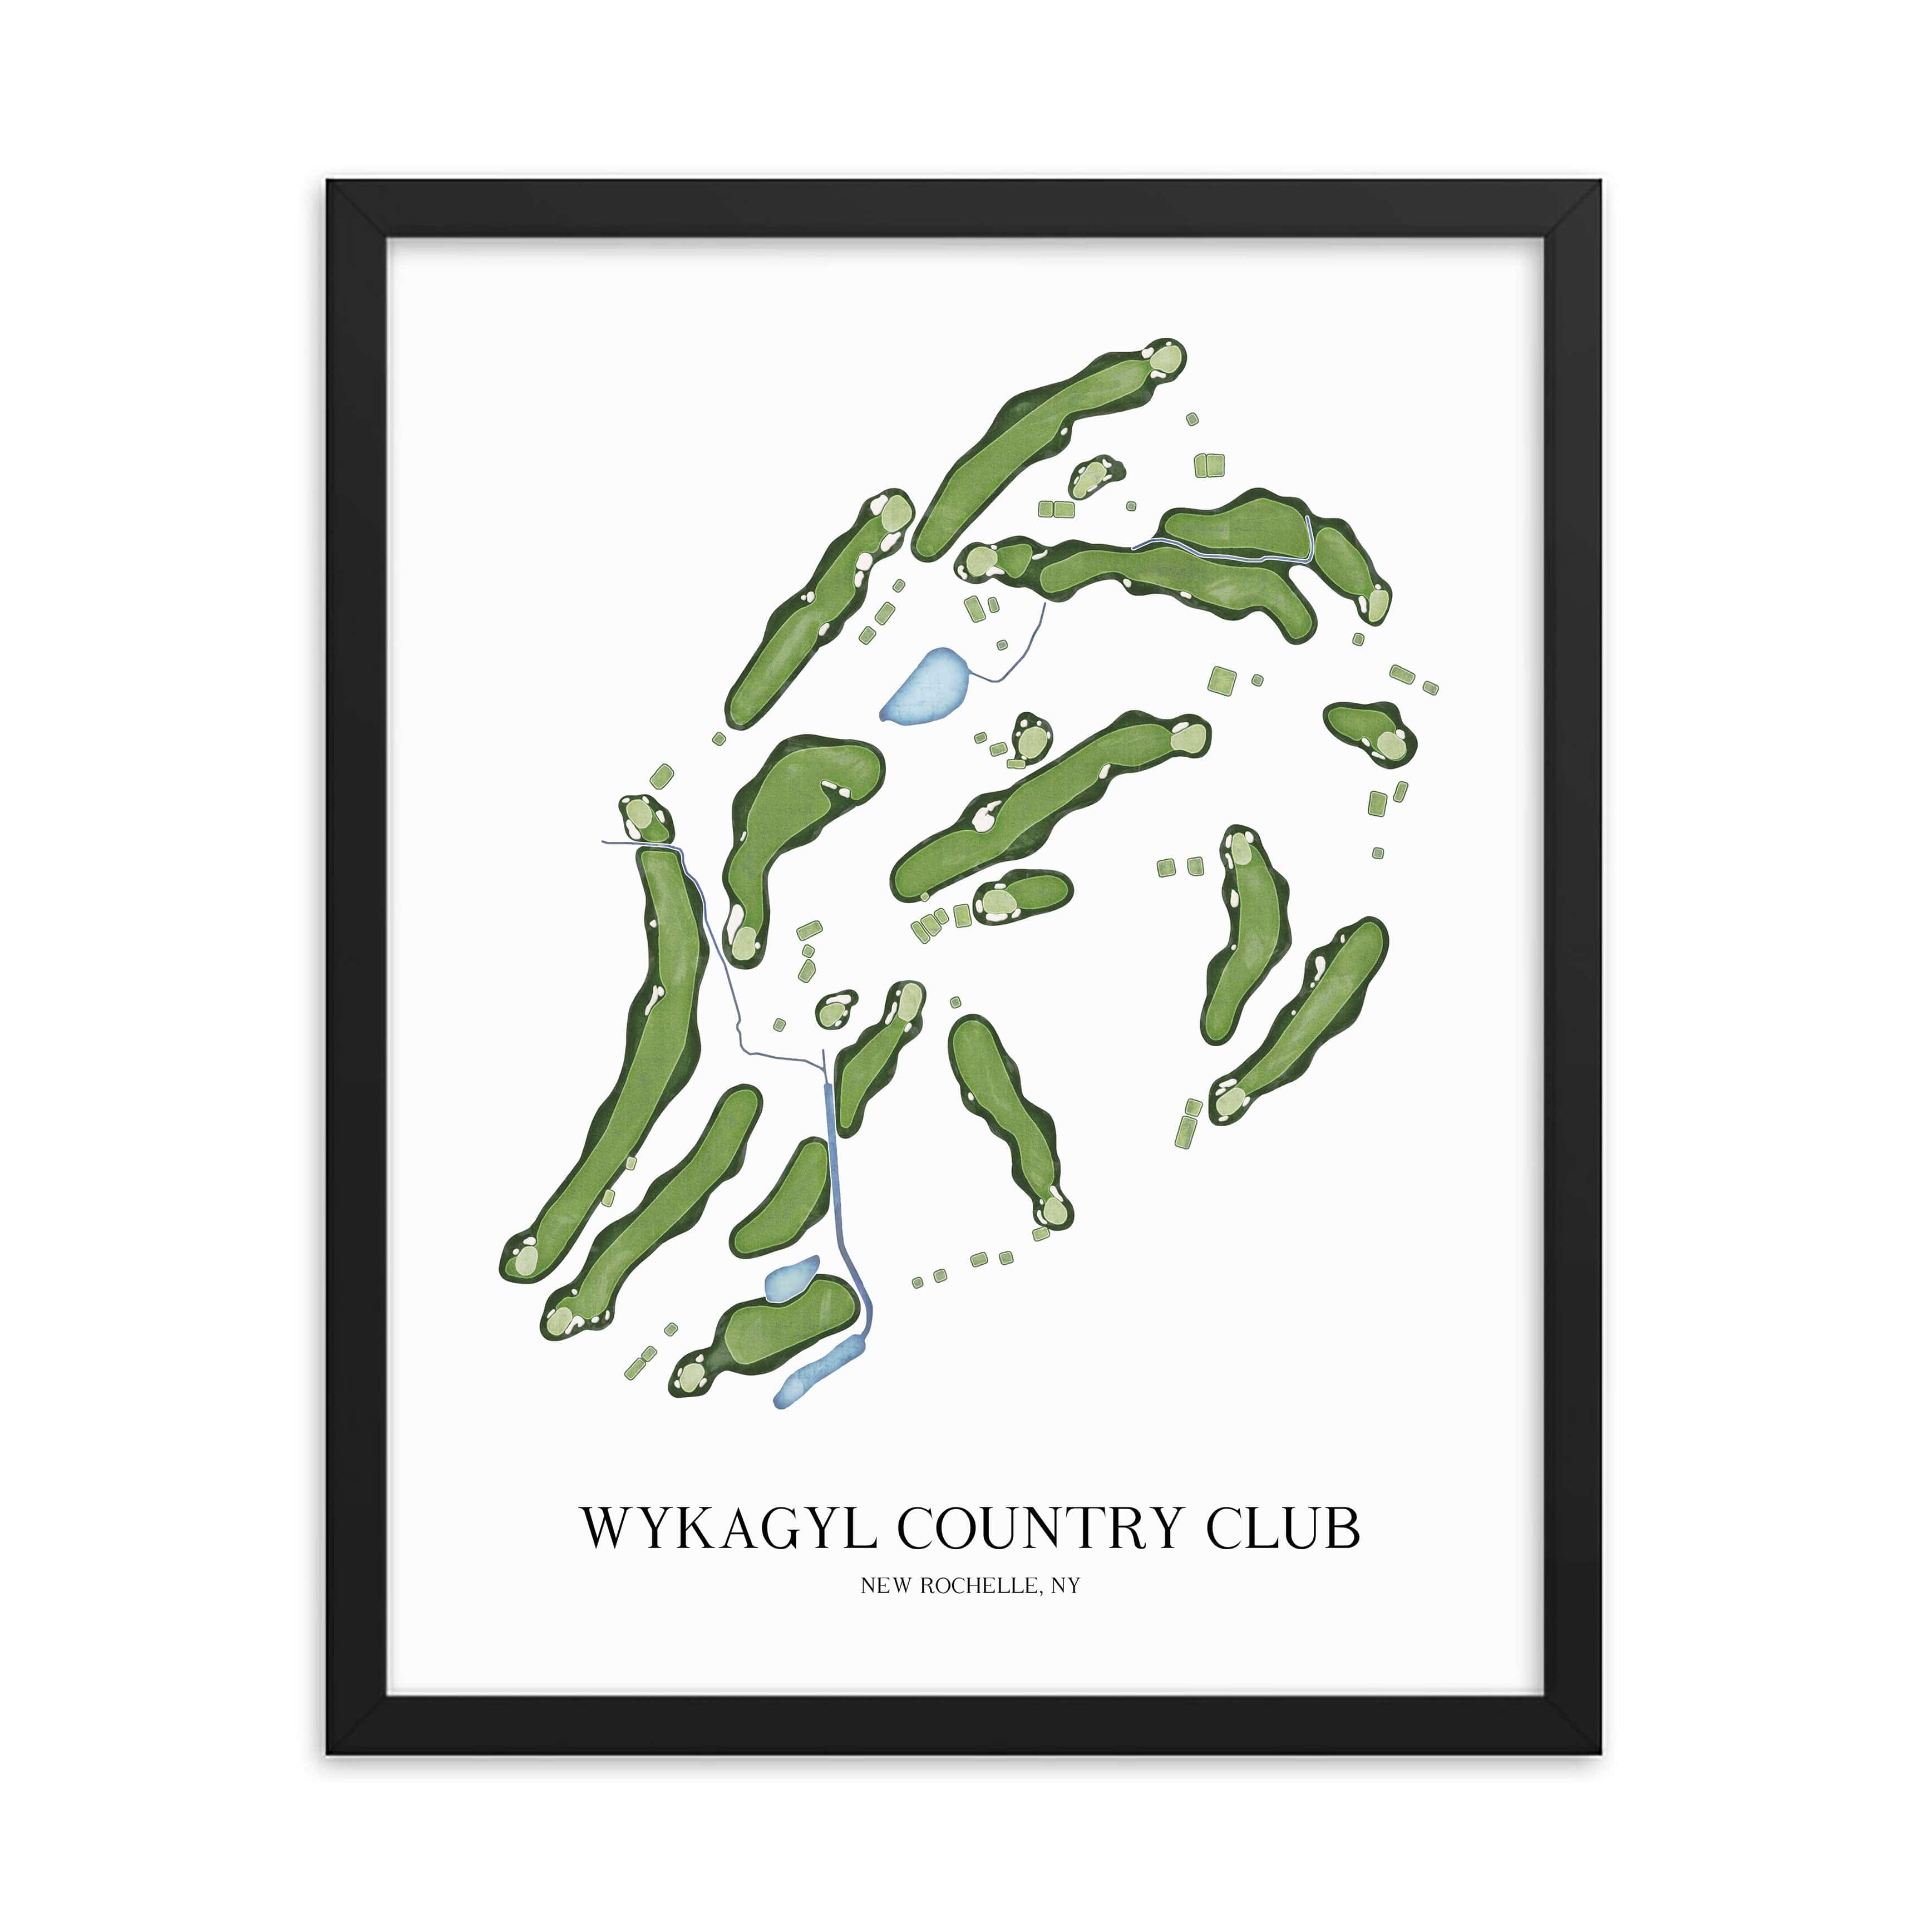 The 19th Hole Golf Shop - Golf Course Prints -  Wykagyl Country Club Golf Course Map